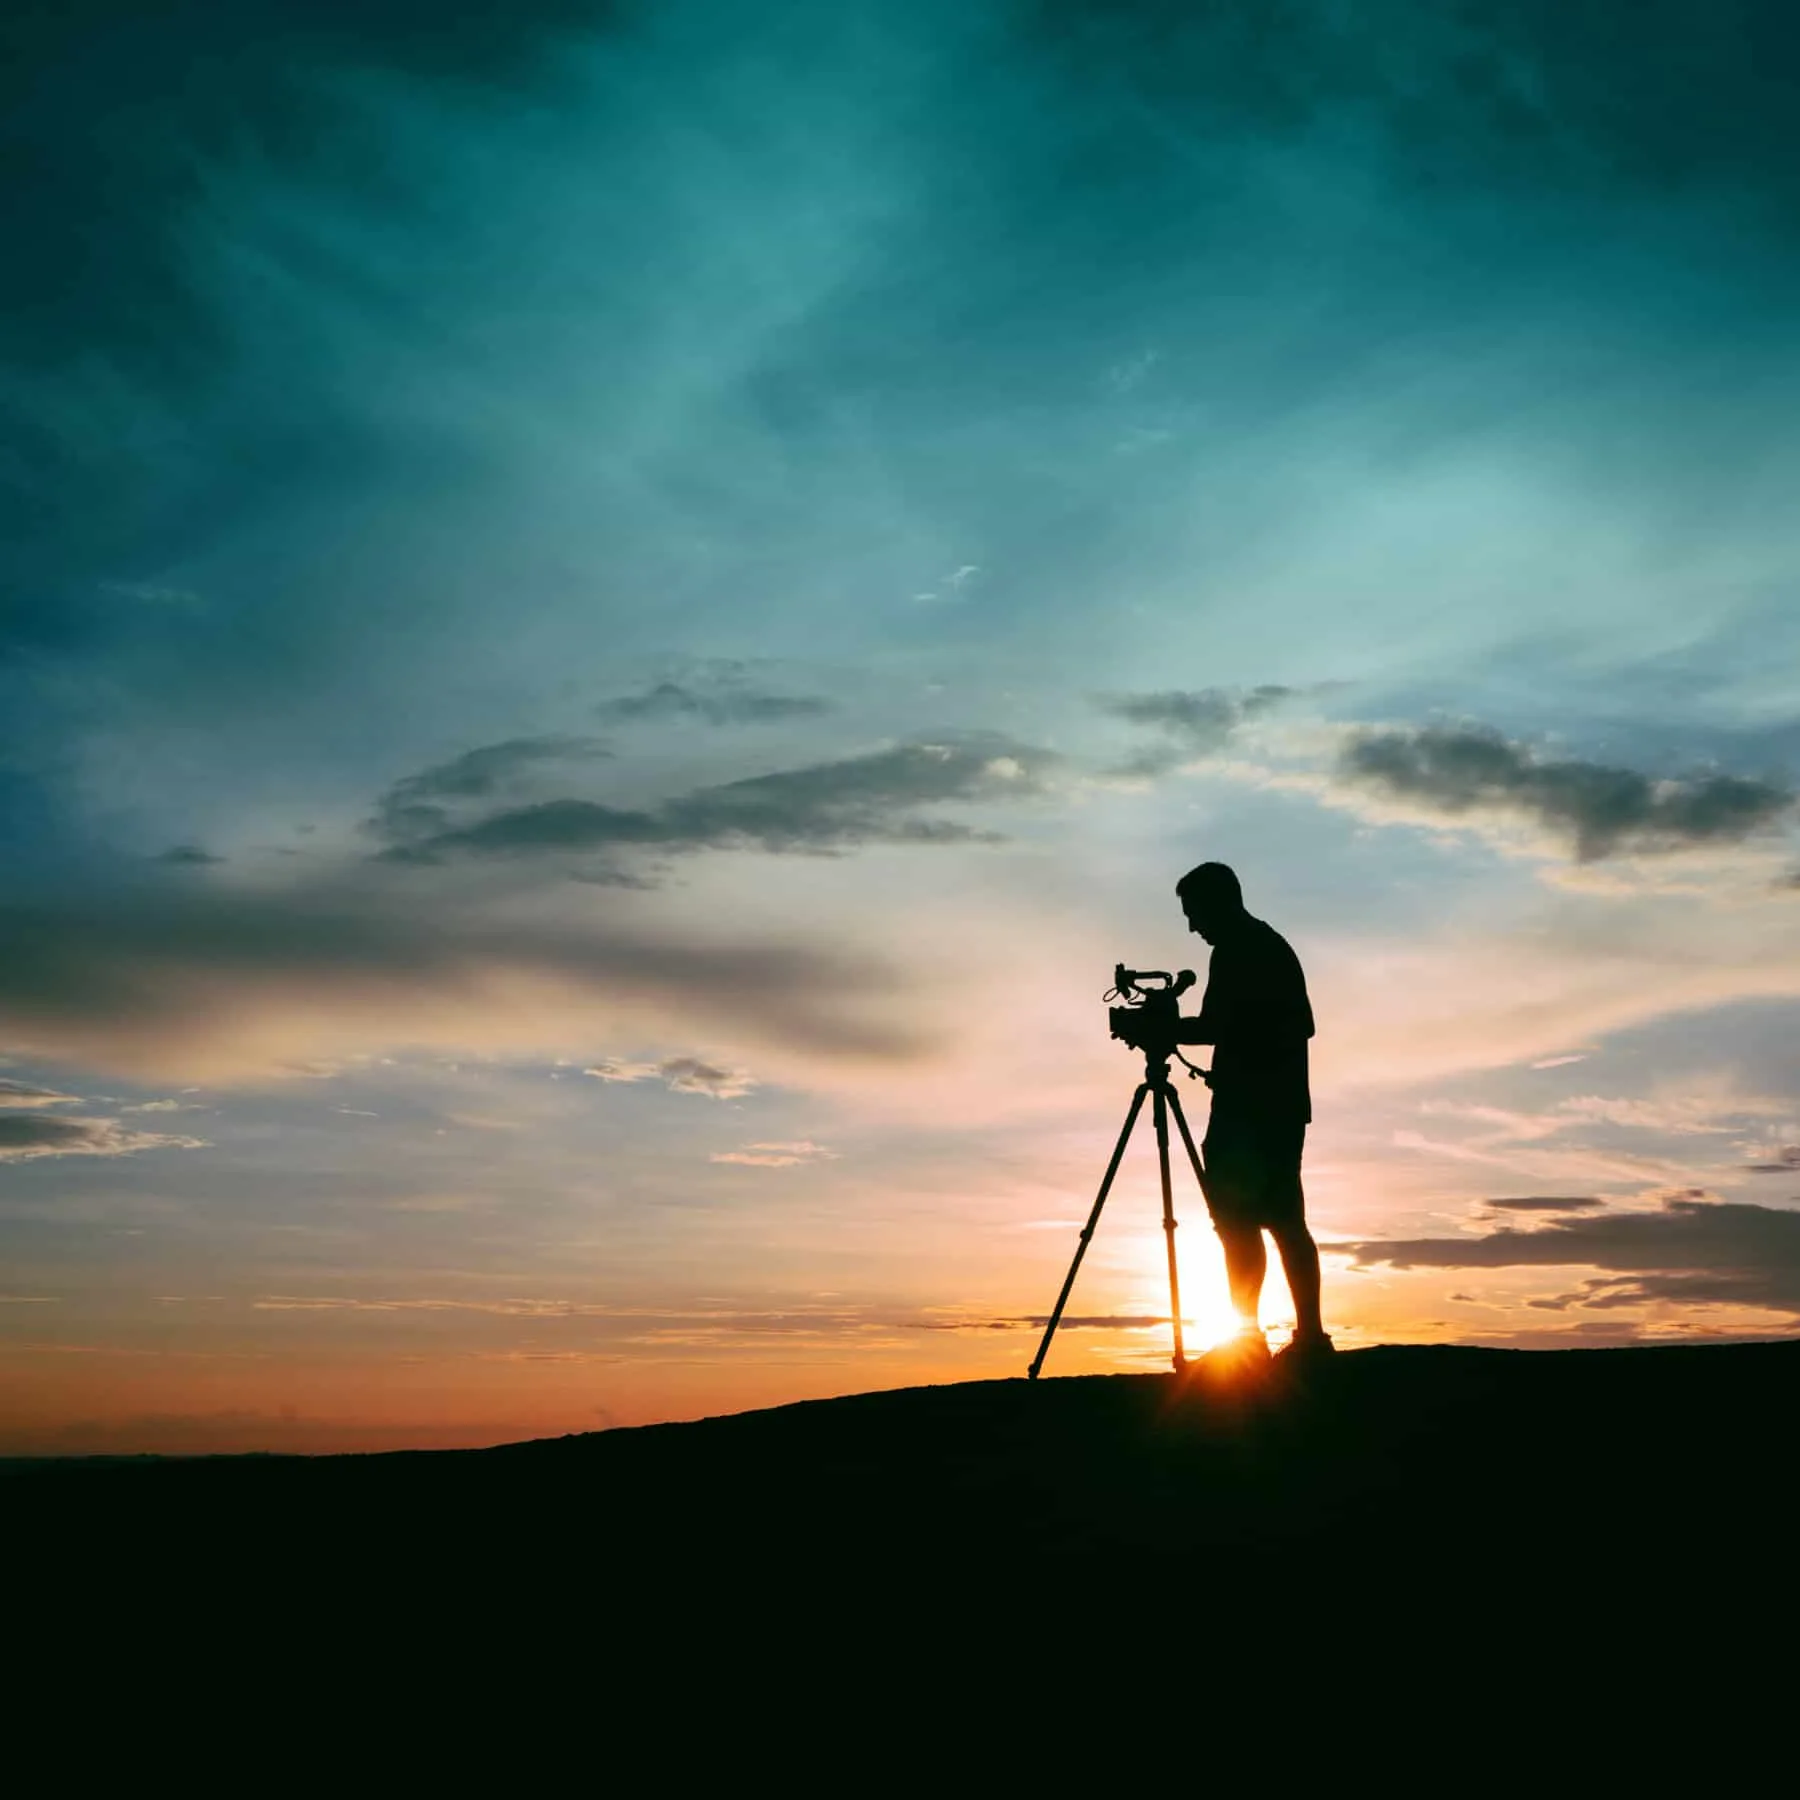 A man in silhouette setting up a camera, with the sun setting behind him.